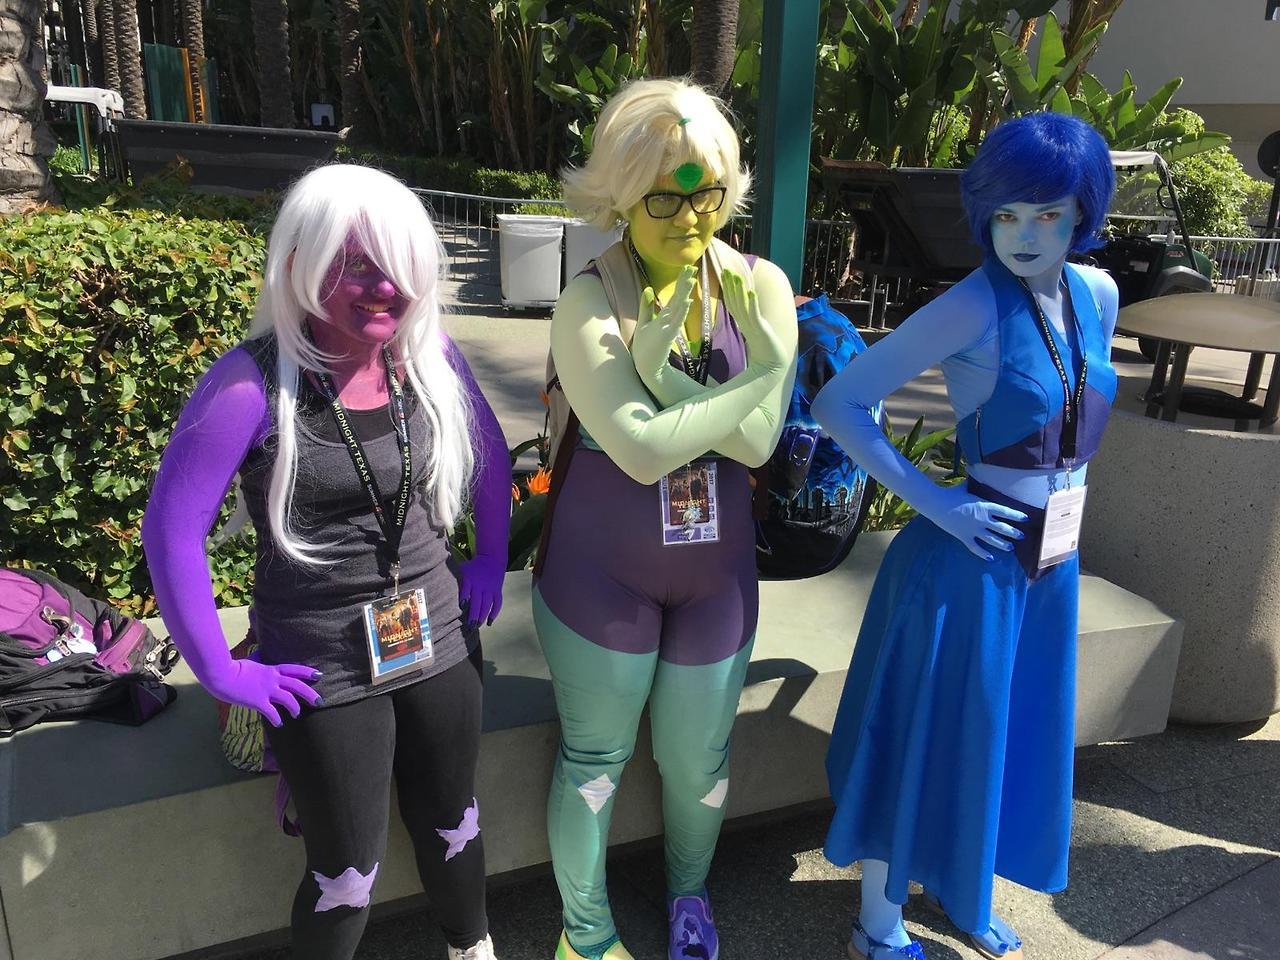 So here are pictures from Wondercon 2017! I only went on Sunday and was wearing armsocks so I didn’t take that many pictures. Luckily I had a little help. Overall it was an awesome day! Shout out to...